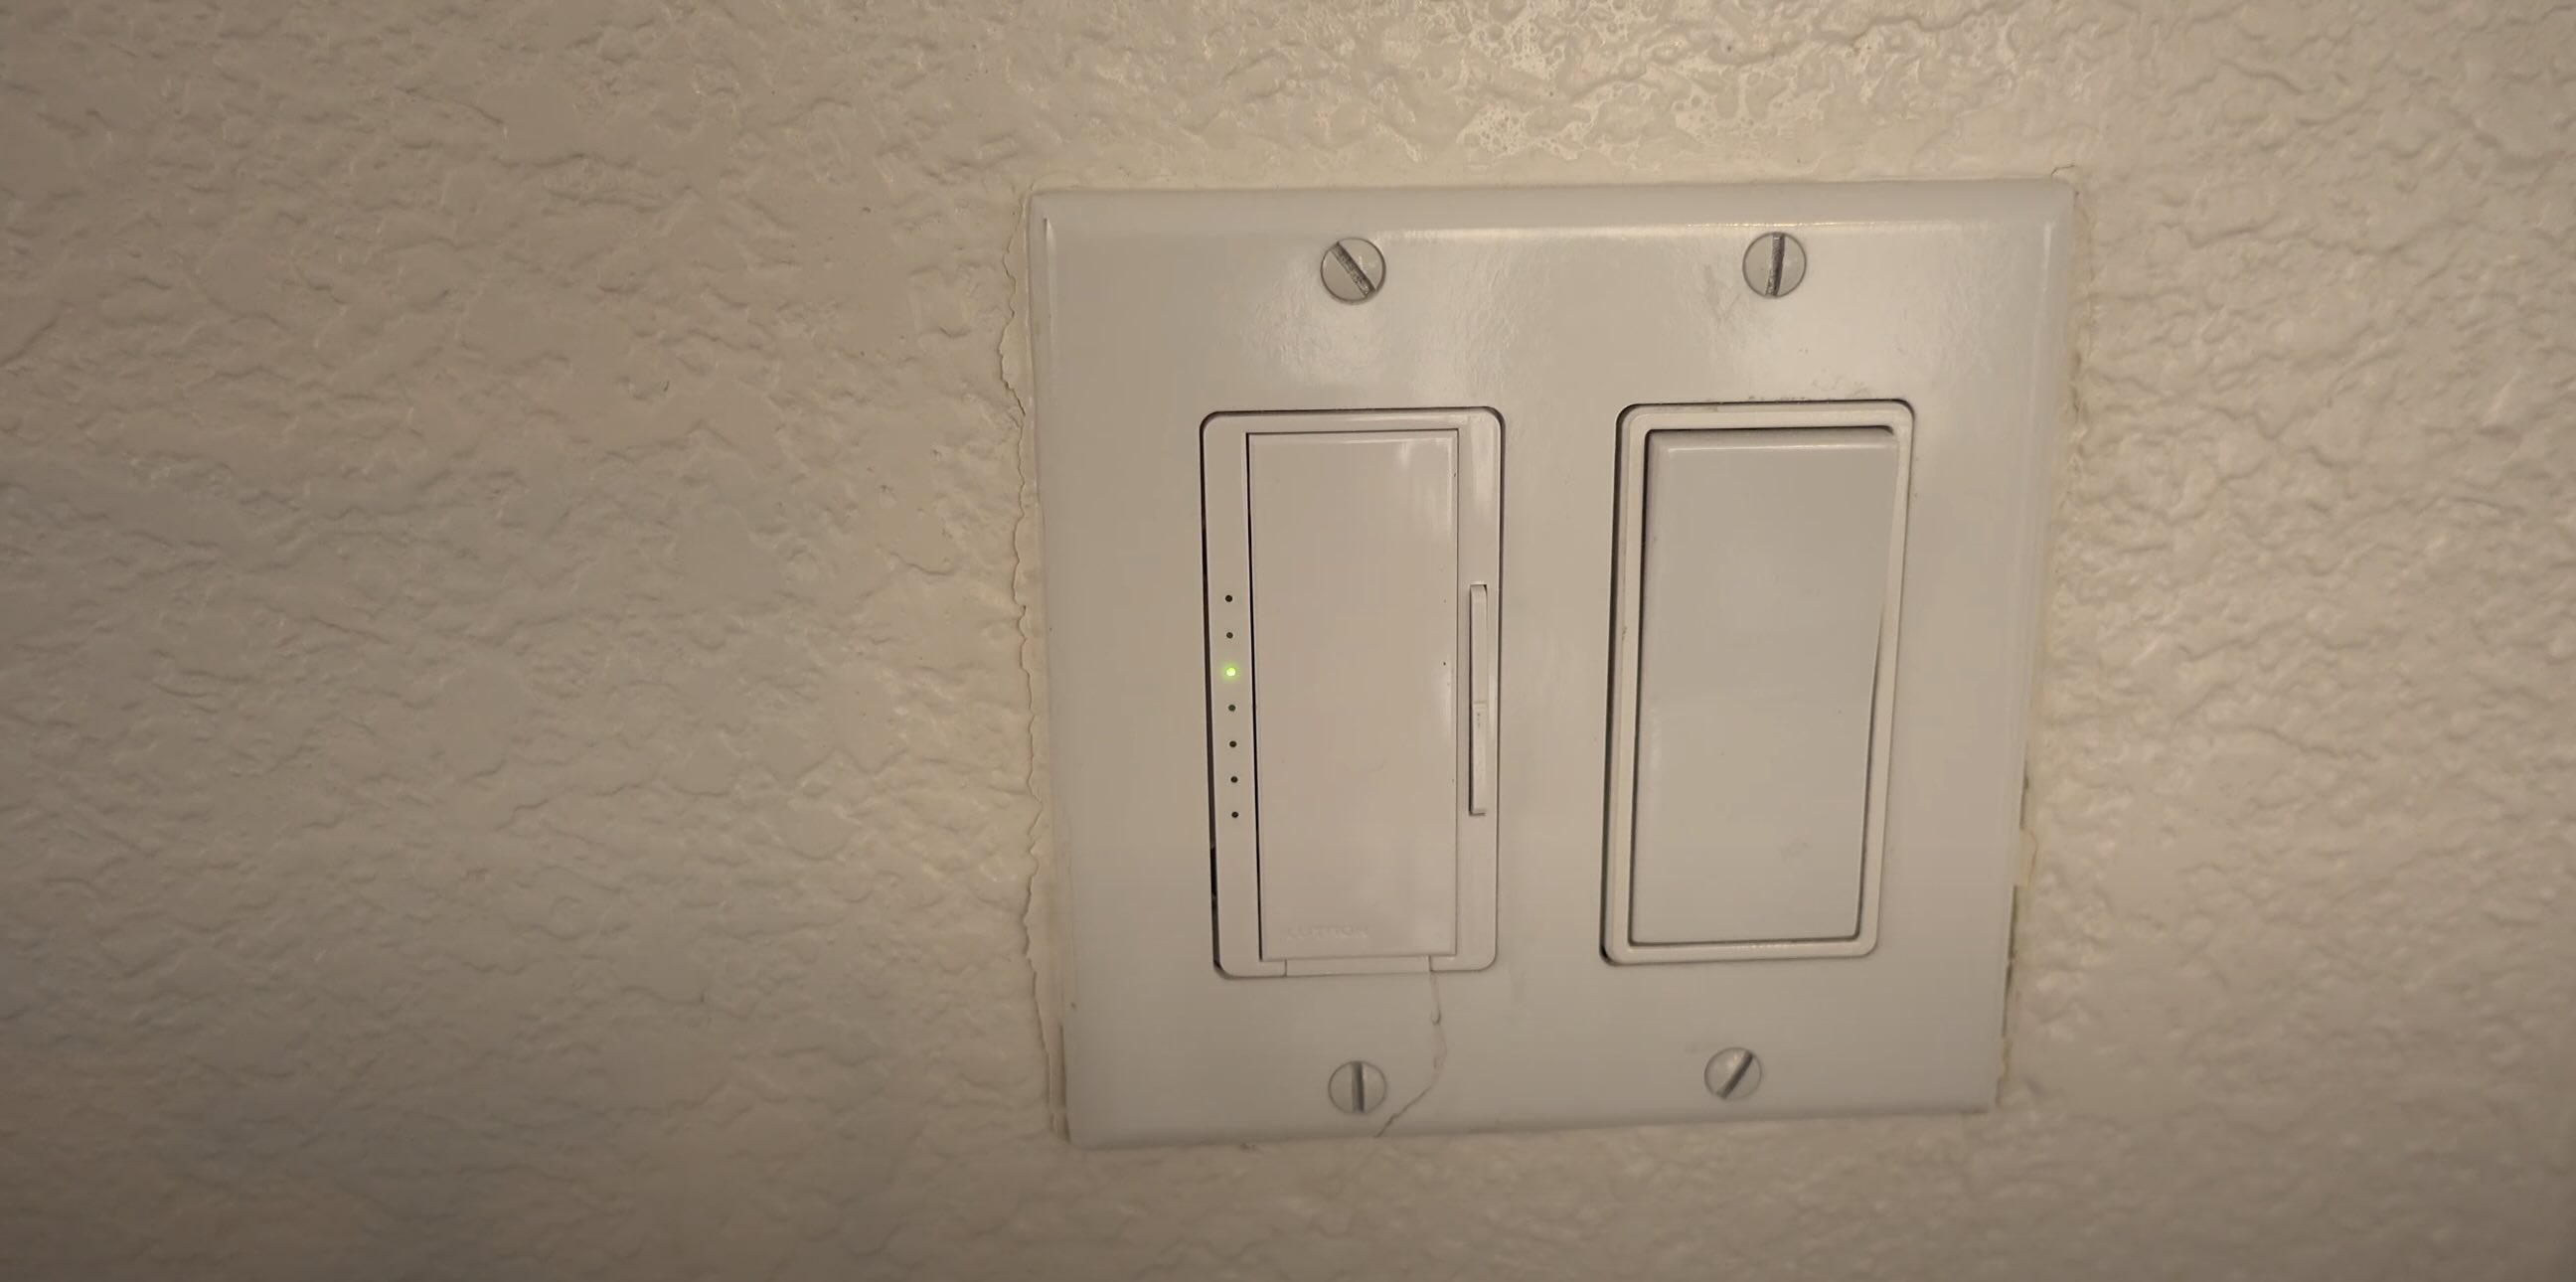 How To Disable A Dimmer Switch